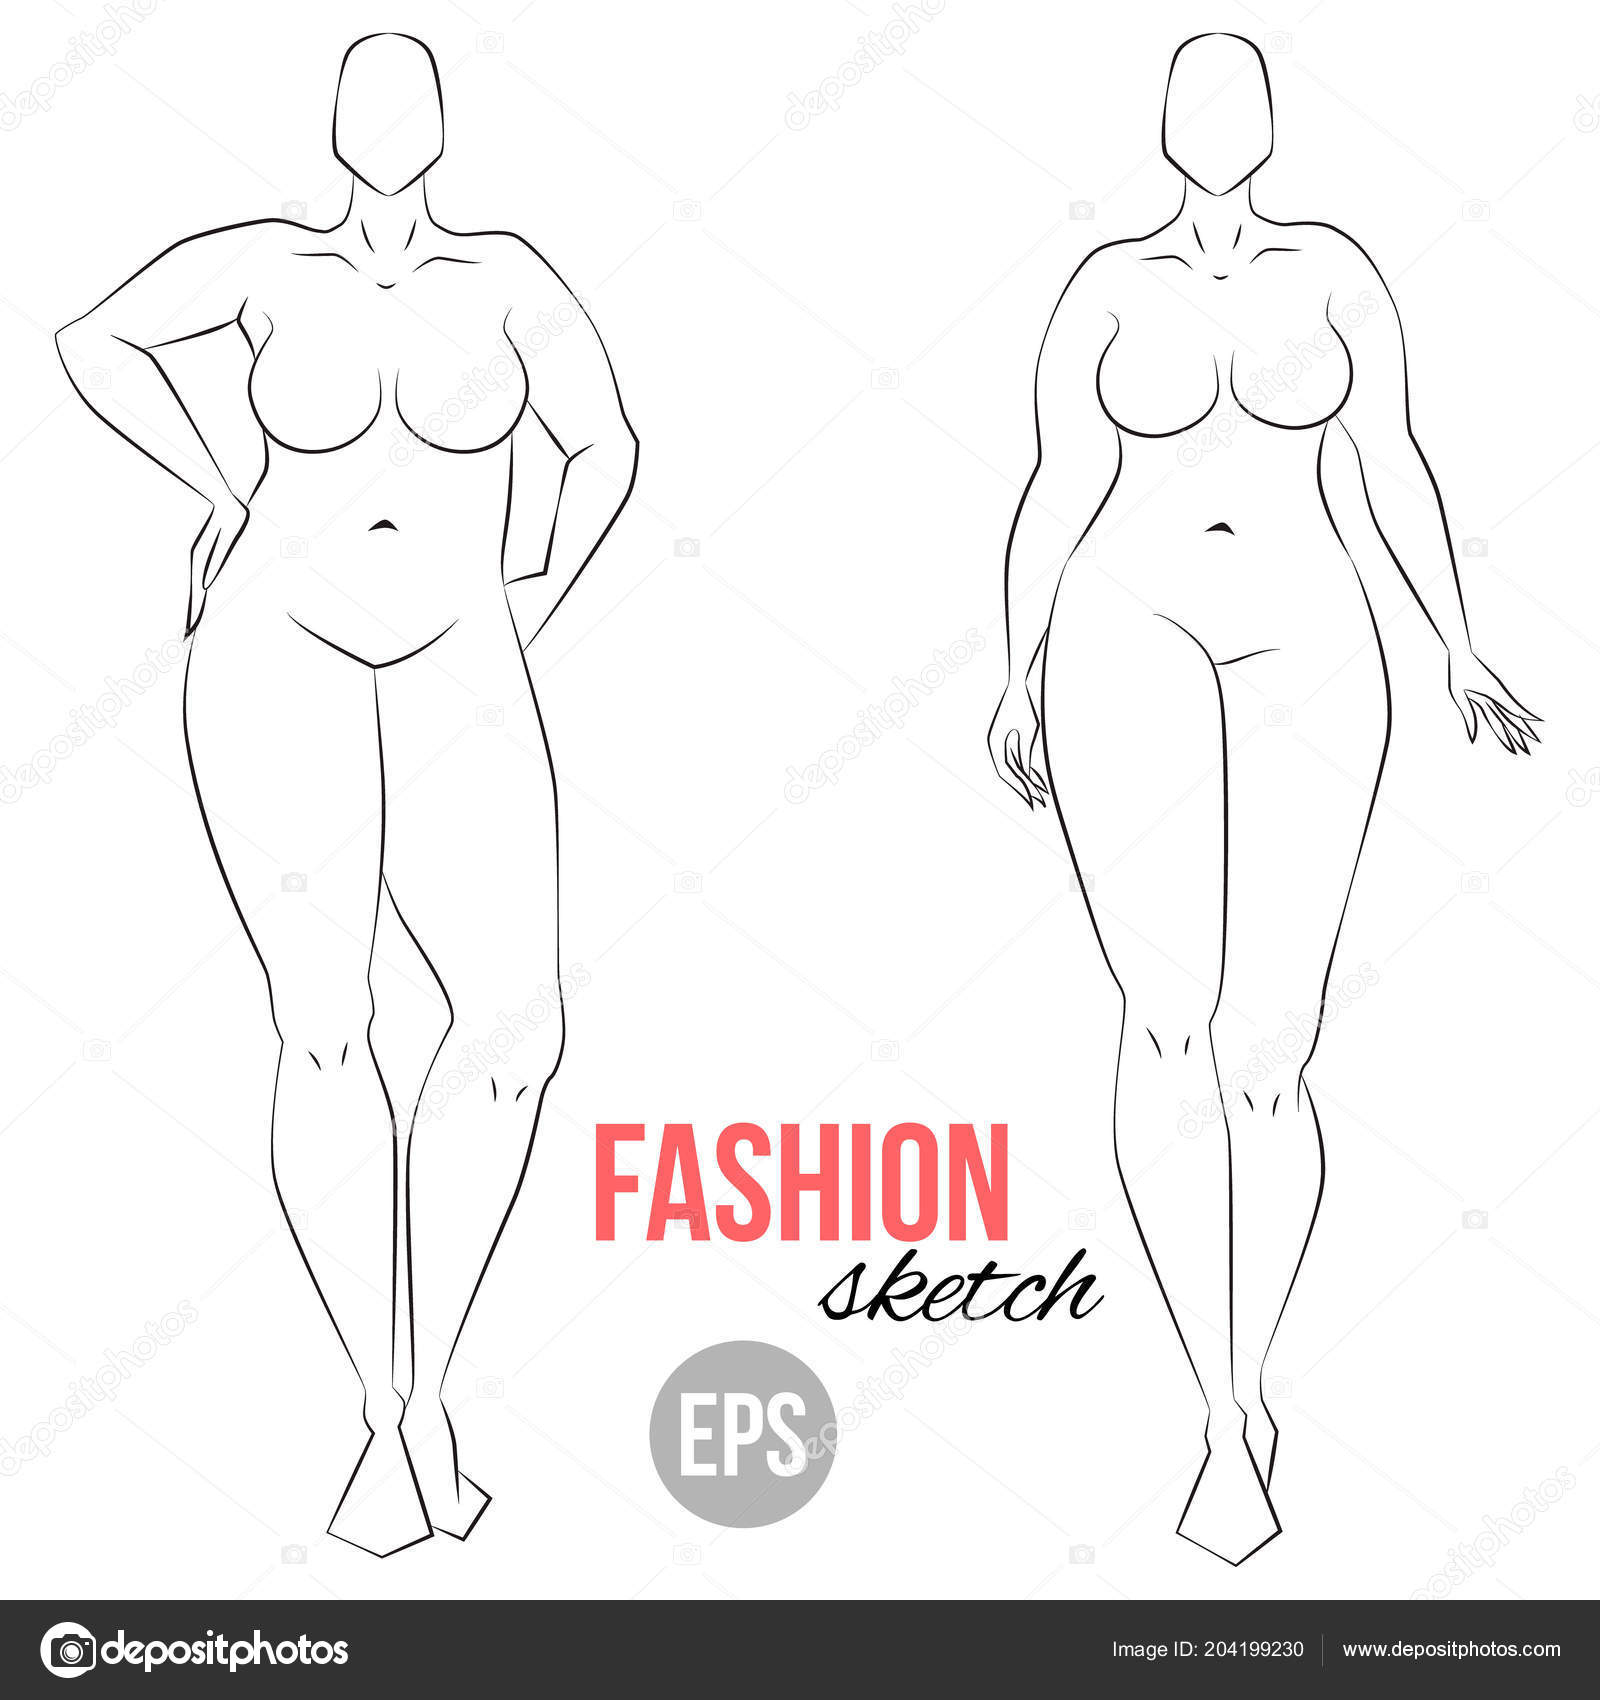 How to Choose a Good Pose for Your Fashion Drawings - dummies